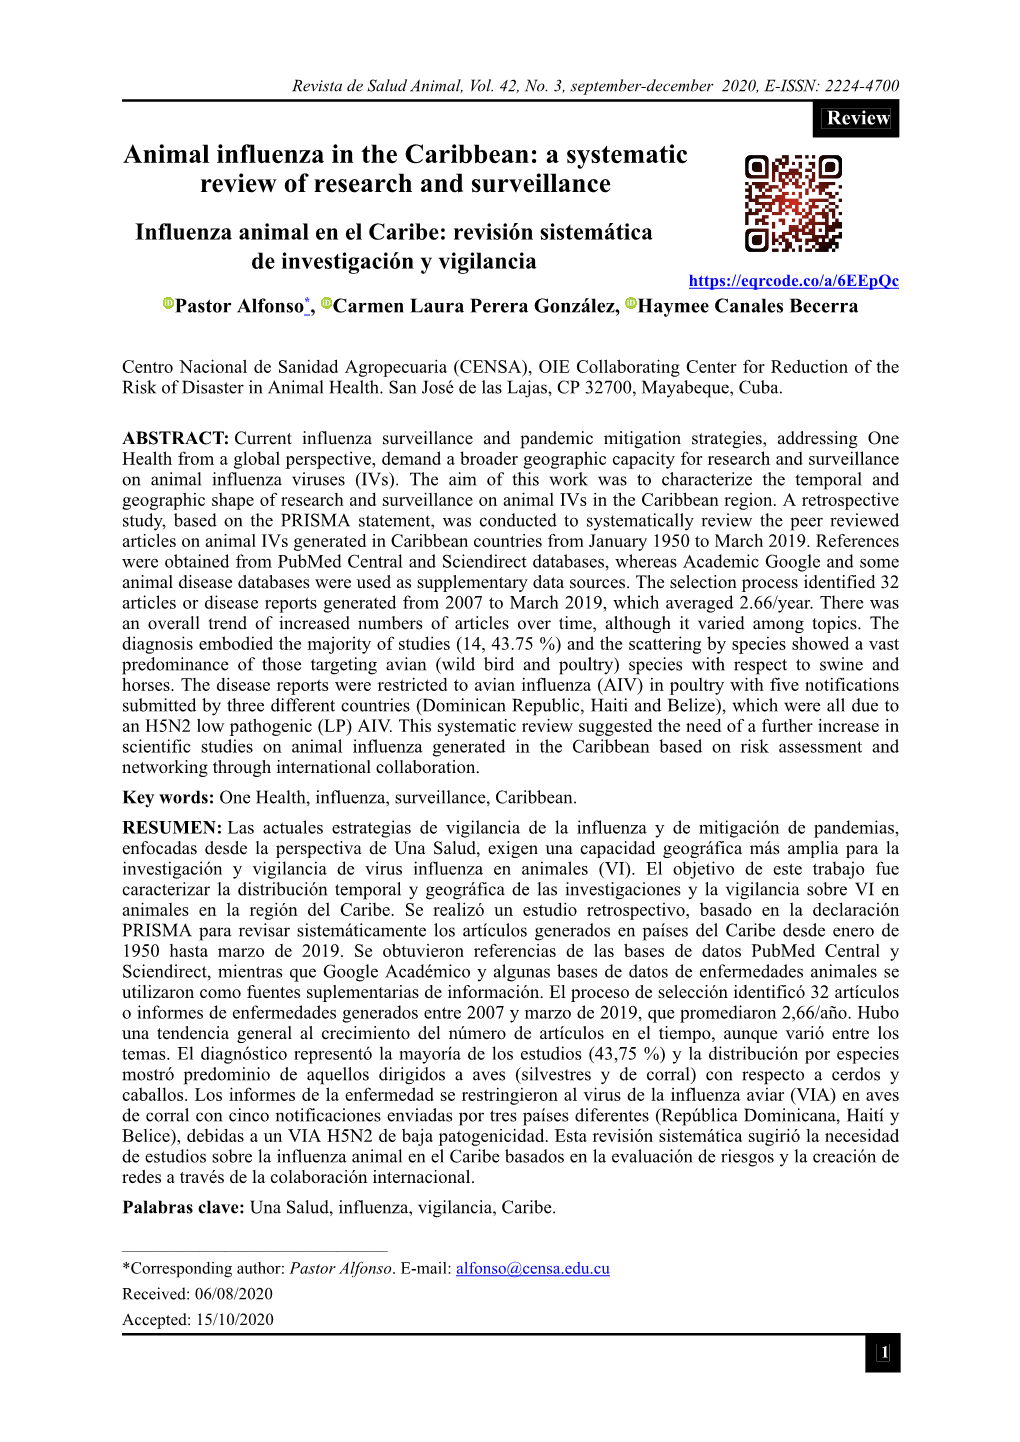 Animal Influenza in the Caribbean: a Systematic Review of Research And